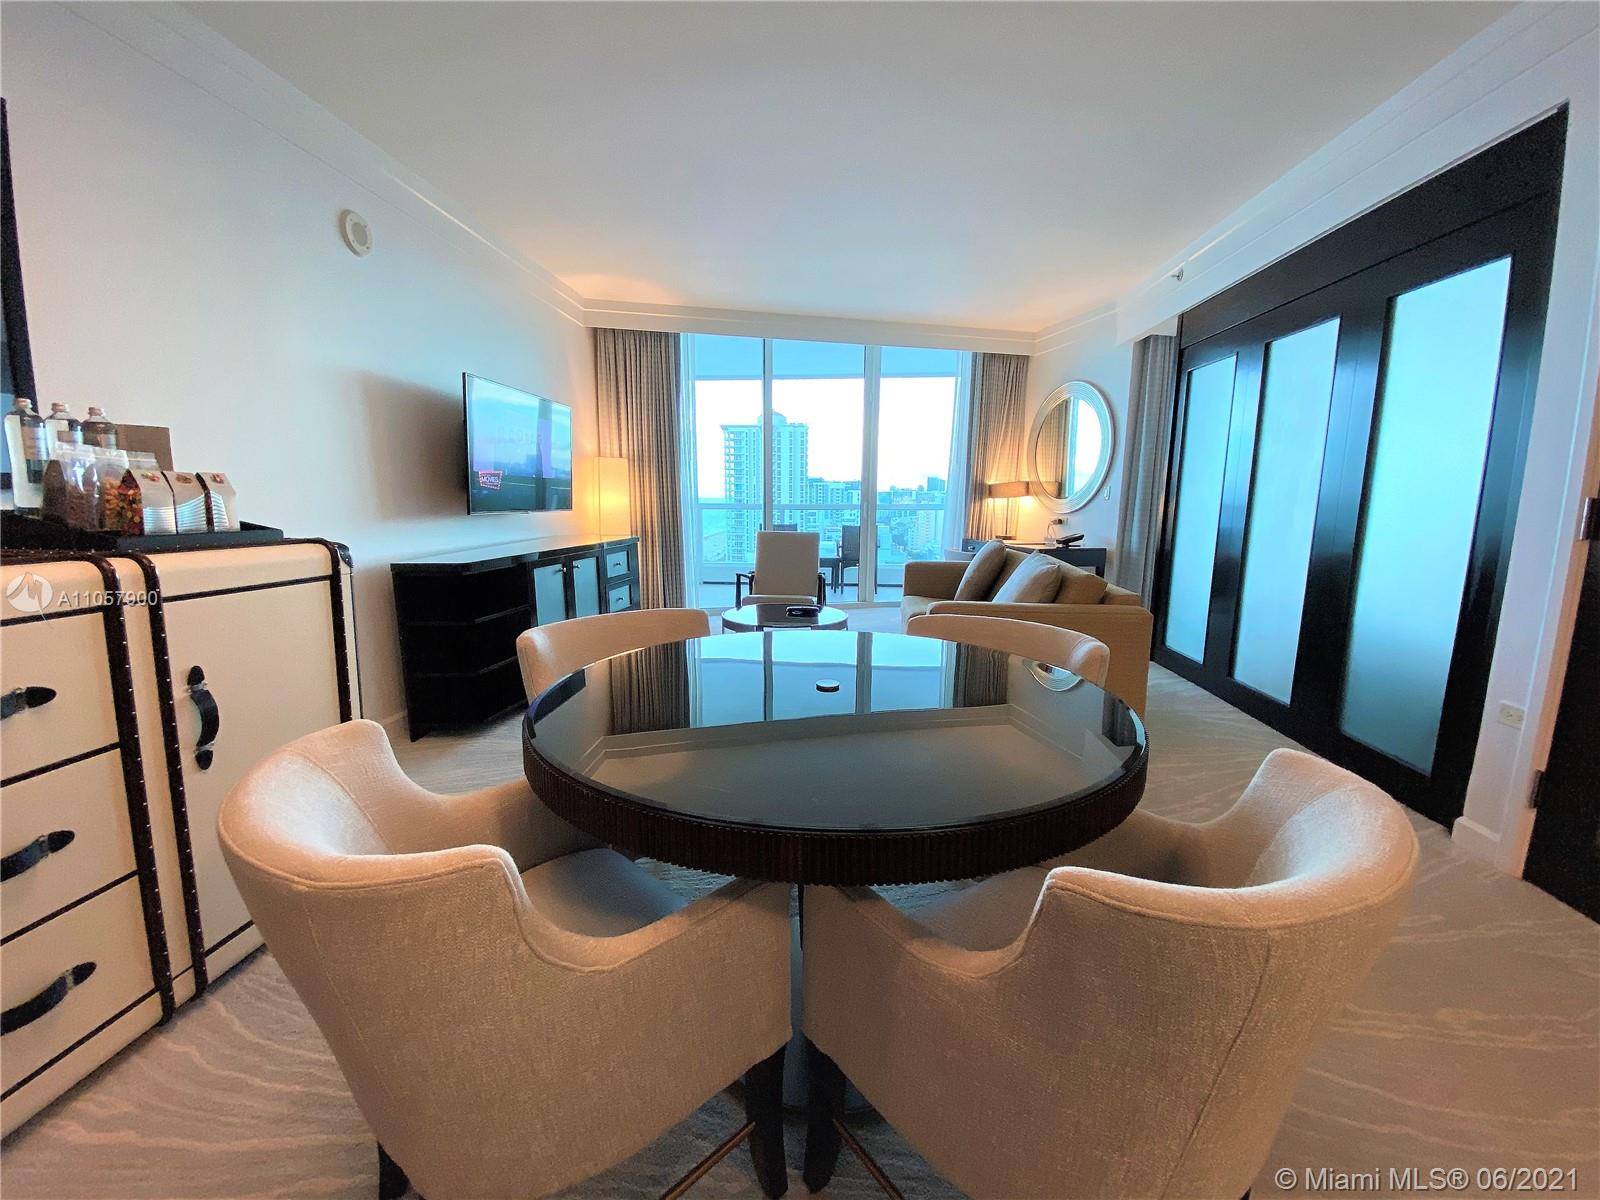 Rare Jumbo Junior Suite at the Iconic Fontainebleau Miami Beach in the Sorrento tower 
802 Square Feet (76 Square Meters). Stunning views of the Ocean and Downtown Miami, High floor.
Less than 14 similar units in the property. Great for investment with over 10% return on rental Income.
Direct Access to Beach From the Hotel. Enjoy it's 7 Swimming Pools (w/ 2 bars and pool side restaurant – La Cote) Kids Pool (w/ Water Slide)
-5,800 Square Feet State-of-the-Art Gym.
-Access to owner's lounge serving continental breakfast.

Award Winning Restaurants in property: Hakkasan, Strip Steak, Scarpetta, and Pizza & Burger.